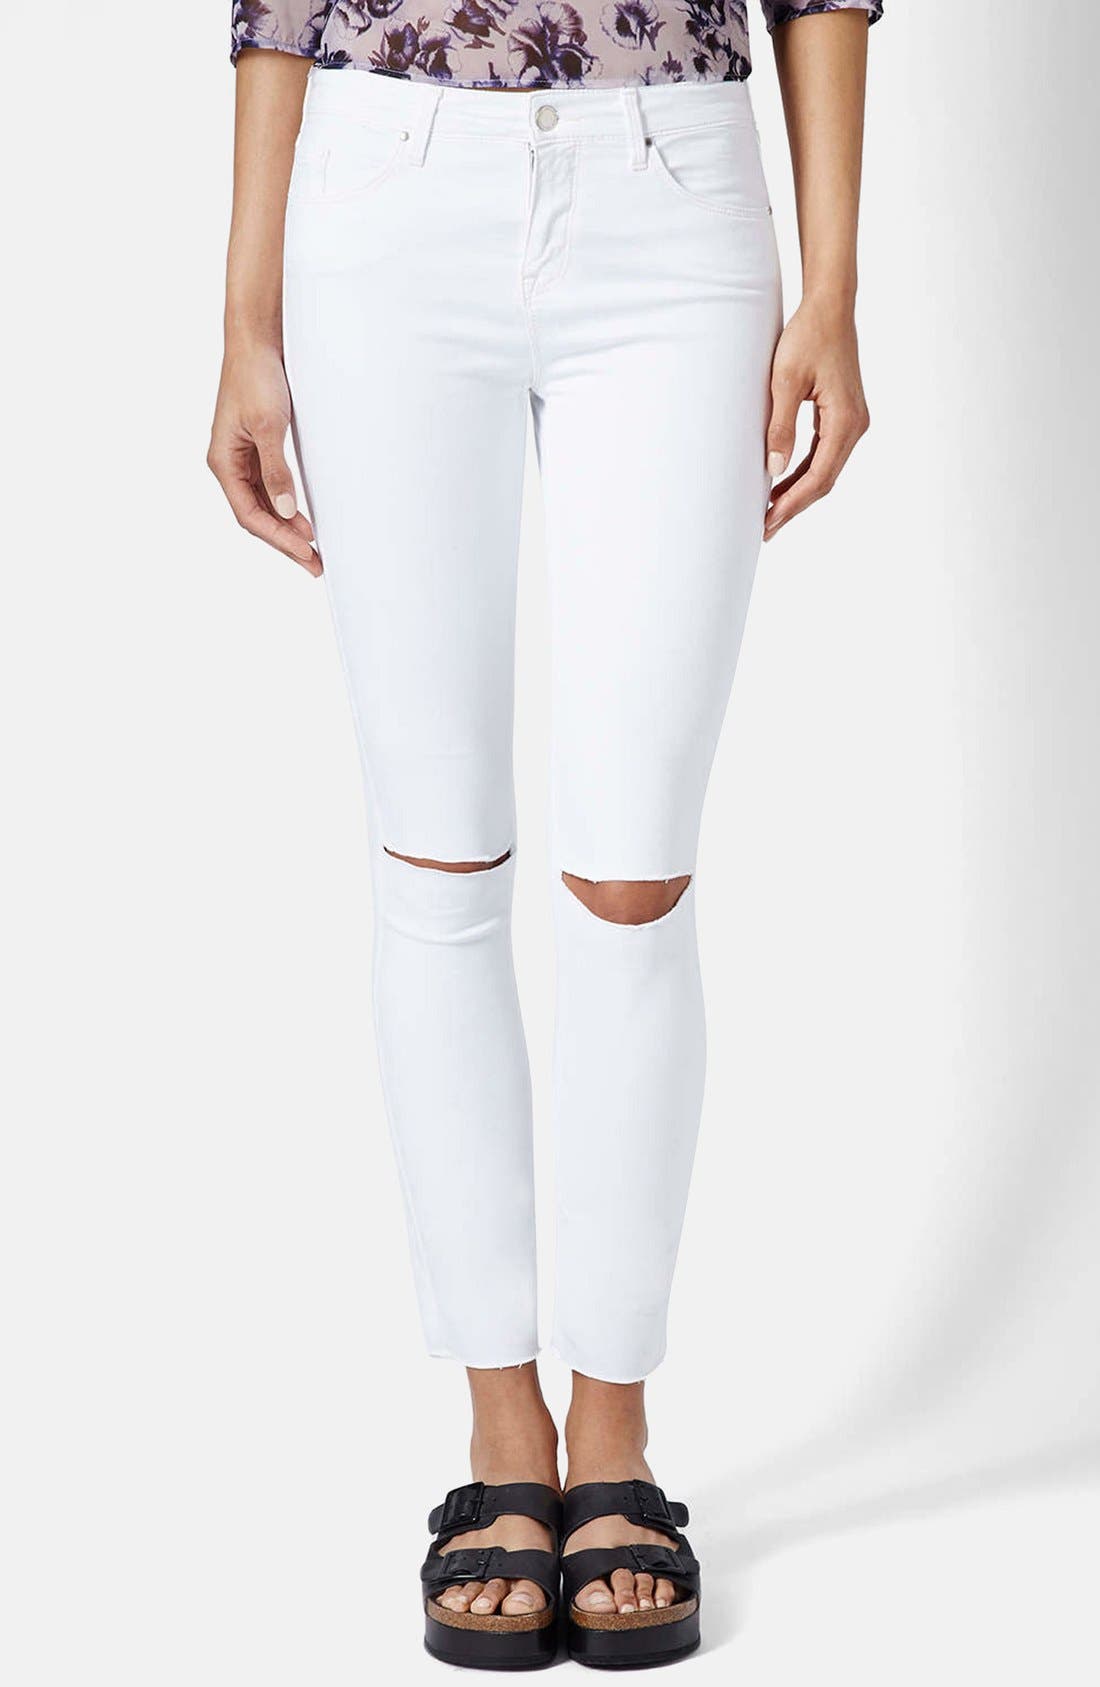 leigh skinny jeans